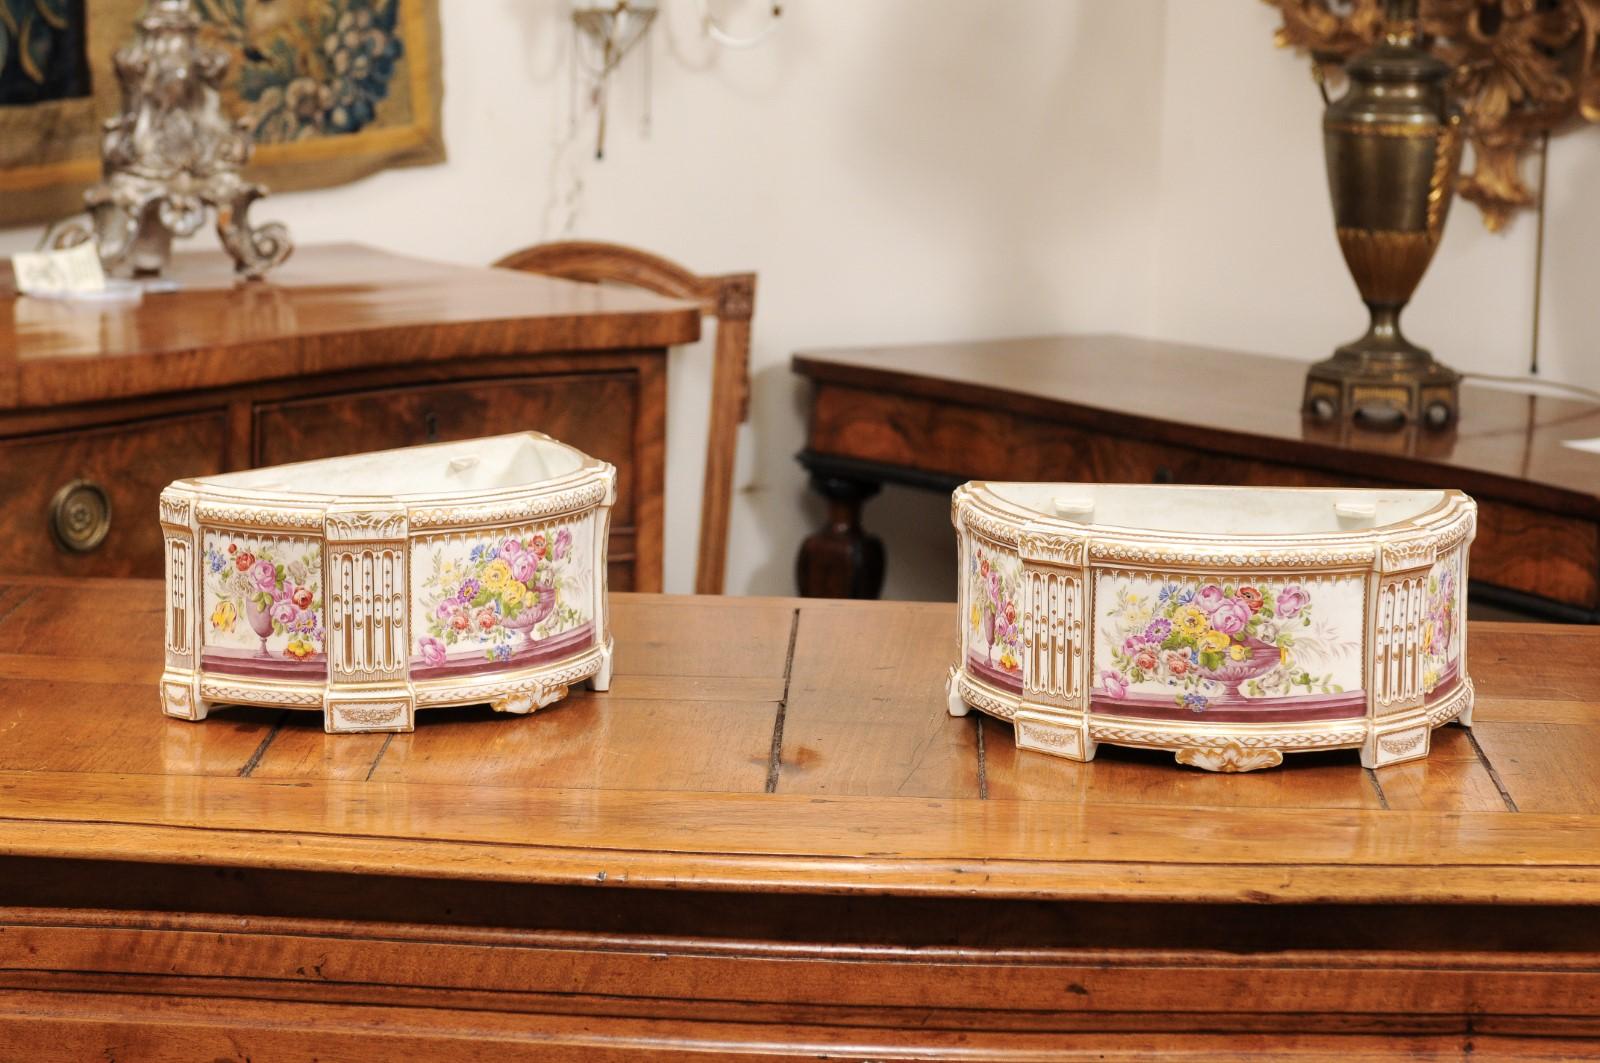 Pair of 19th century French Porcelain Bough Pots with Gilt Accents & Floral Design.